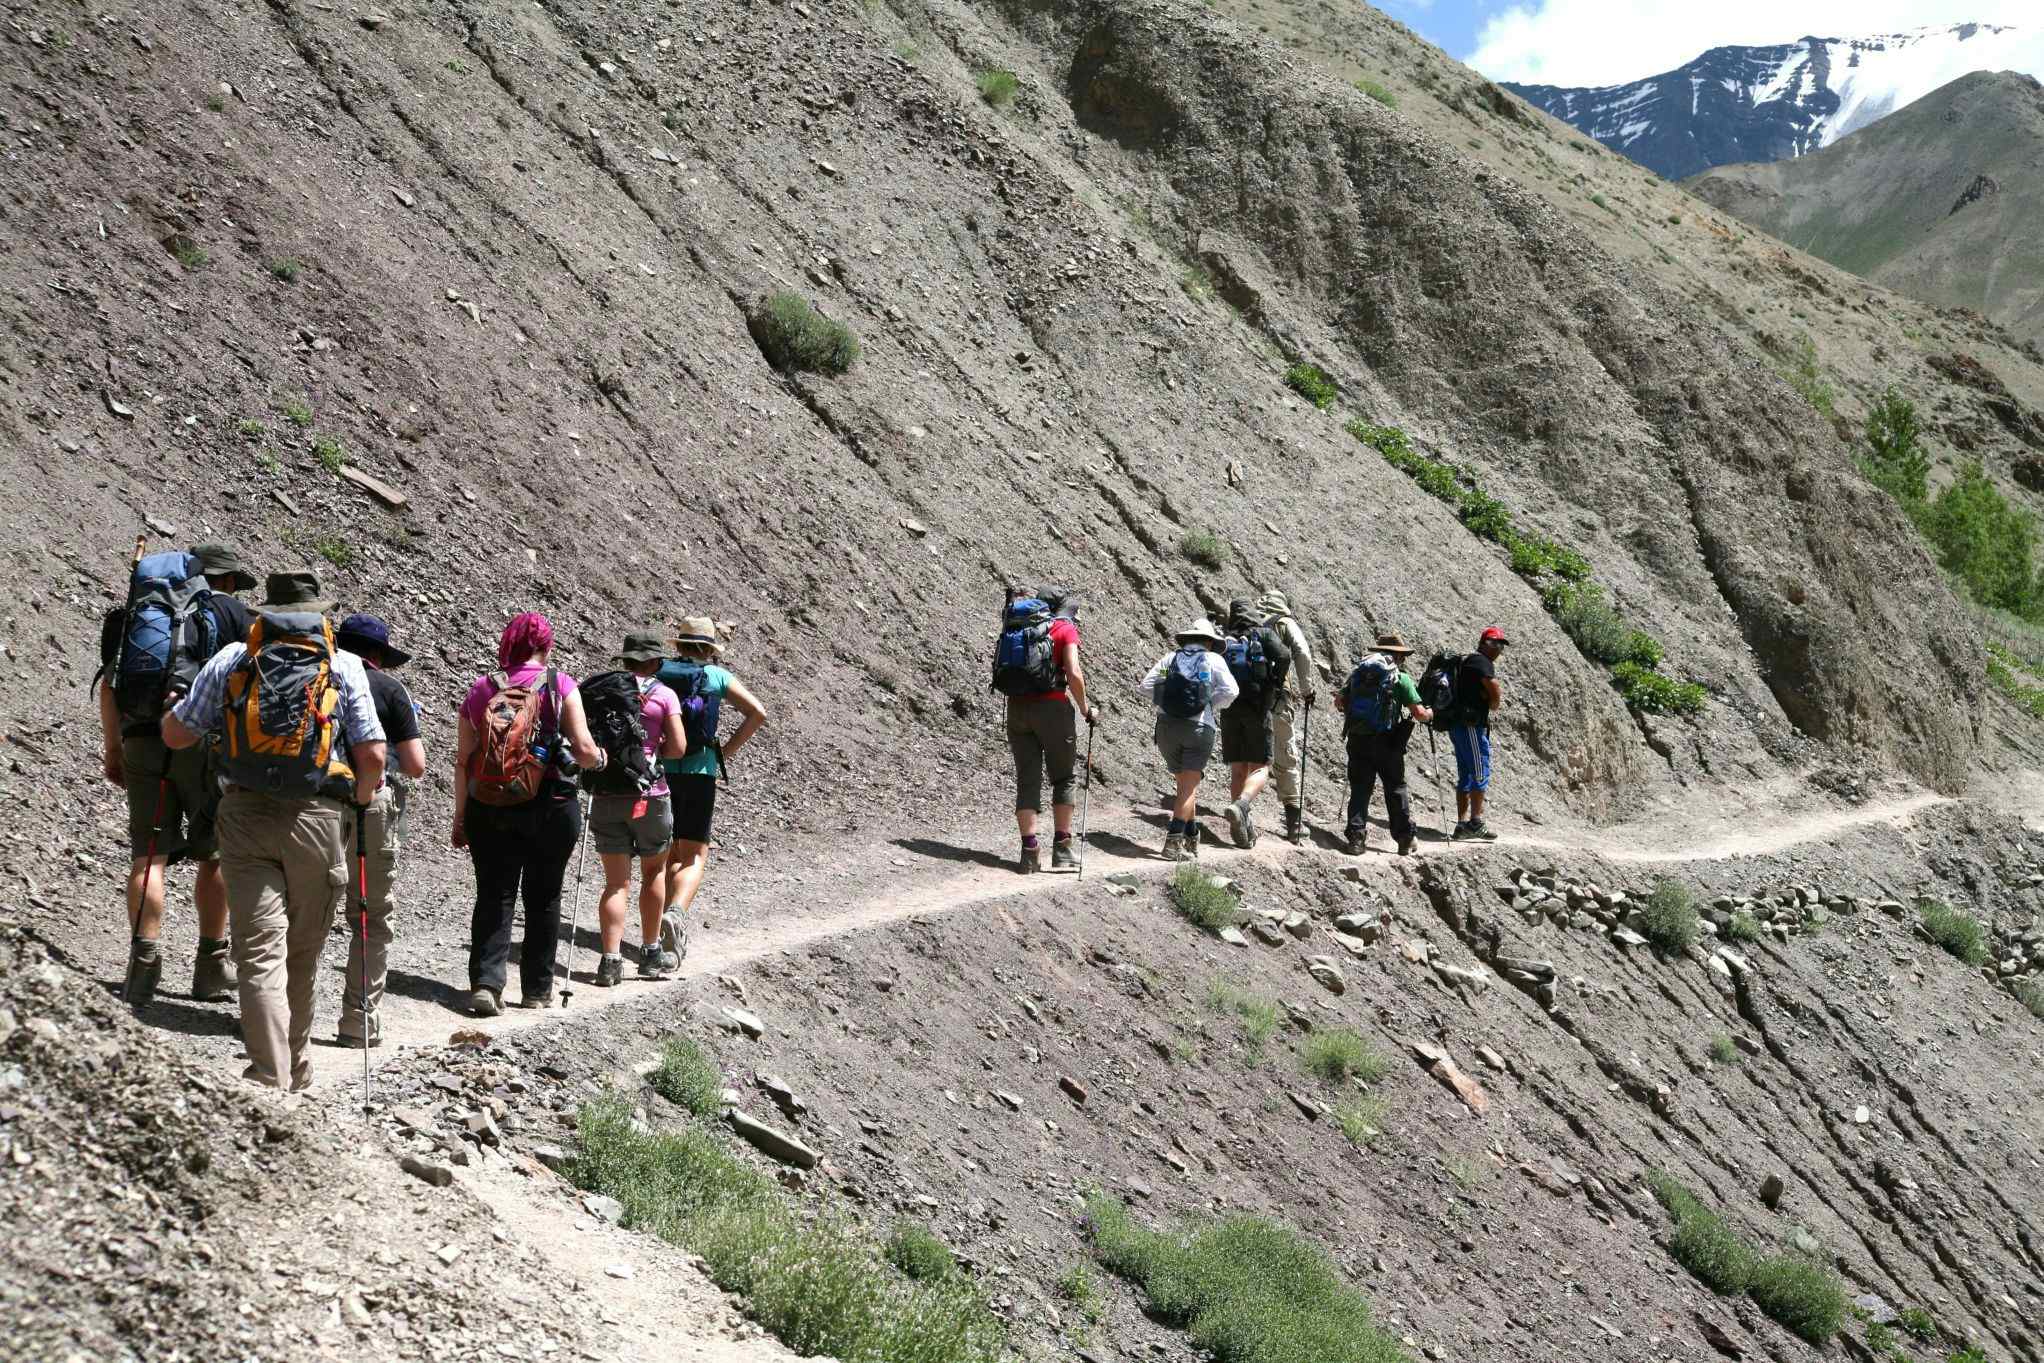 Group of hikers on a path heading towards the Markha Valley in Ladakh, India